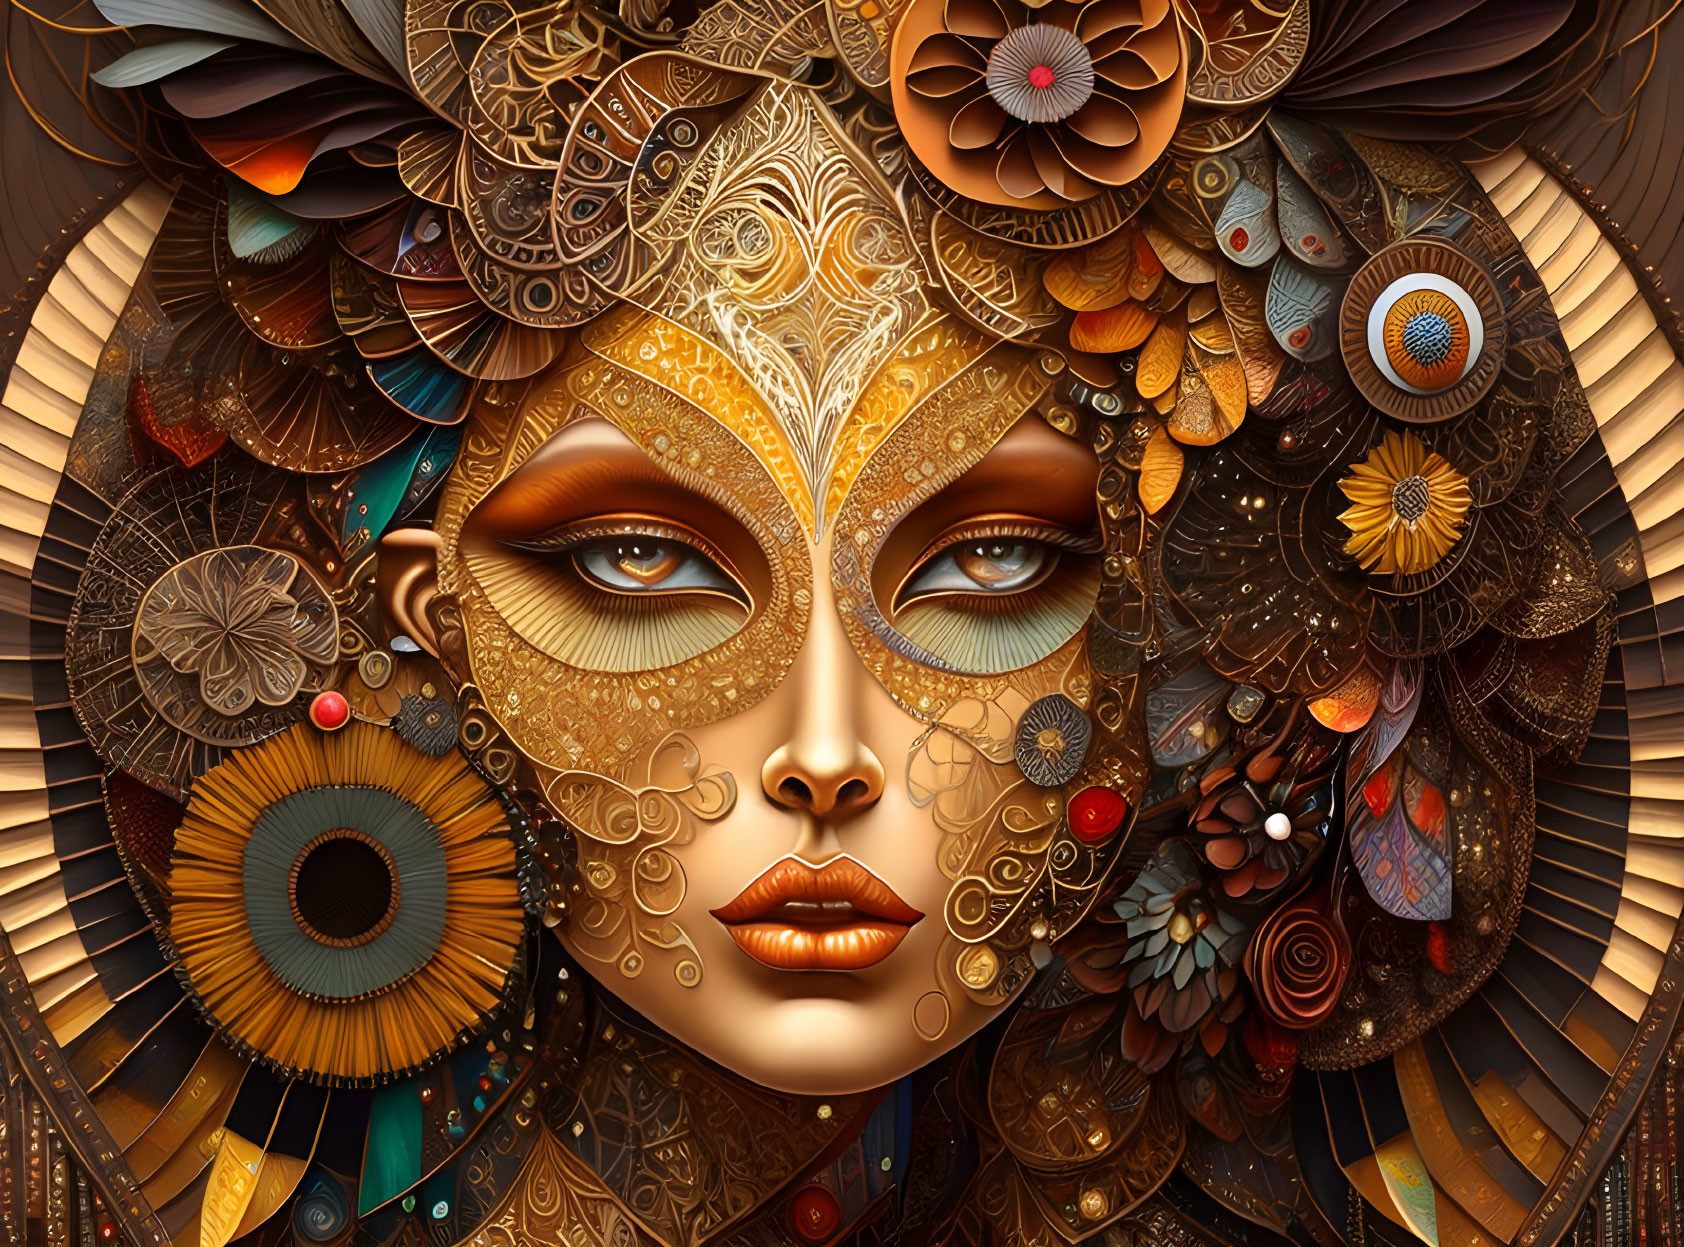 Detailed steampunk-inspired woman's face illustration in bronze and gold tones